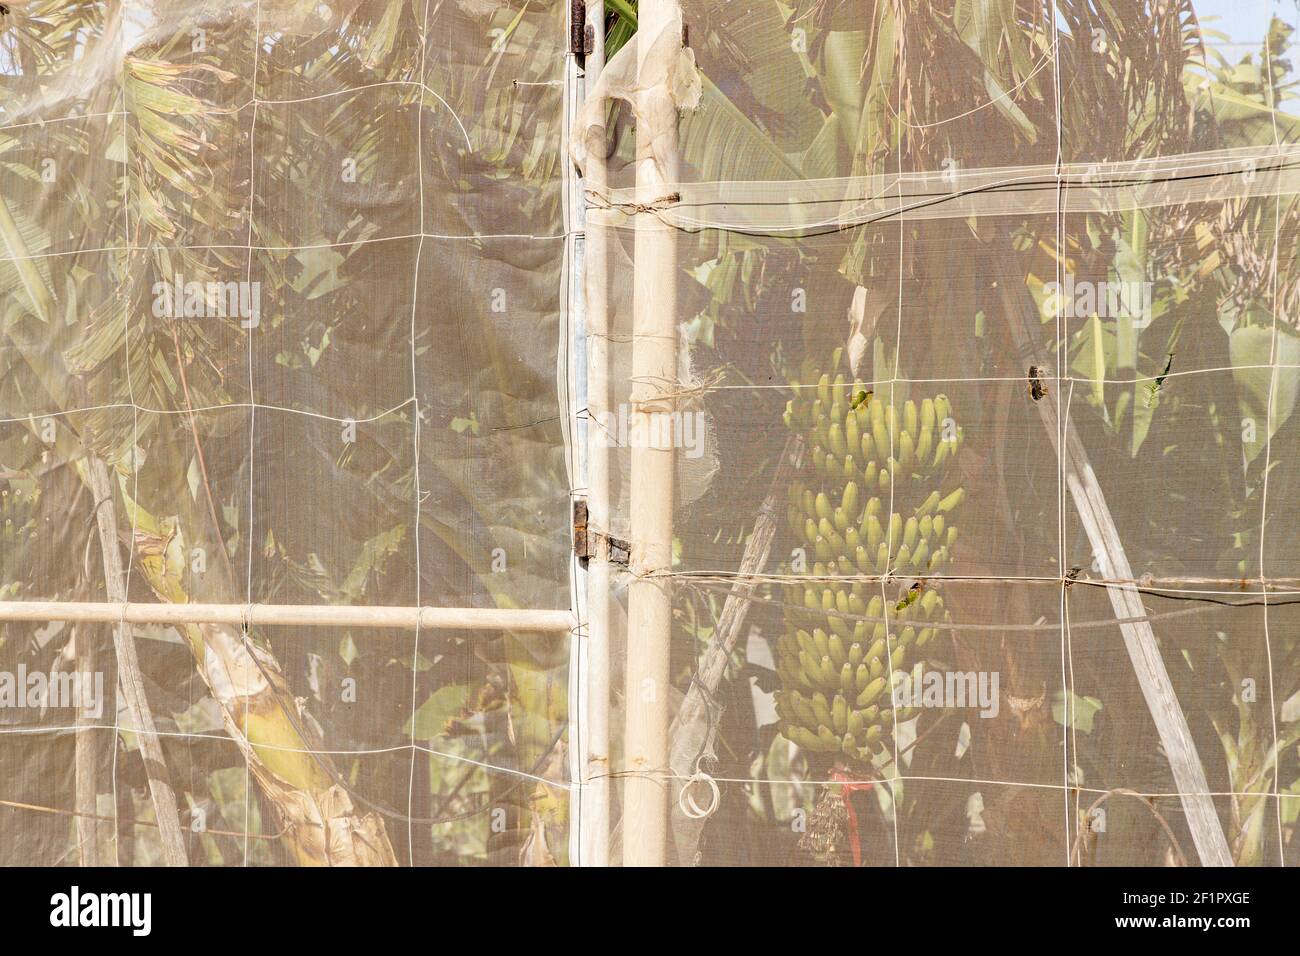 Banana plants seen through the plastic netting that surrounds the plantations on the fincas in Guia de Isora, Tenerife, Canary Islands, Spain Stock Photo